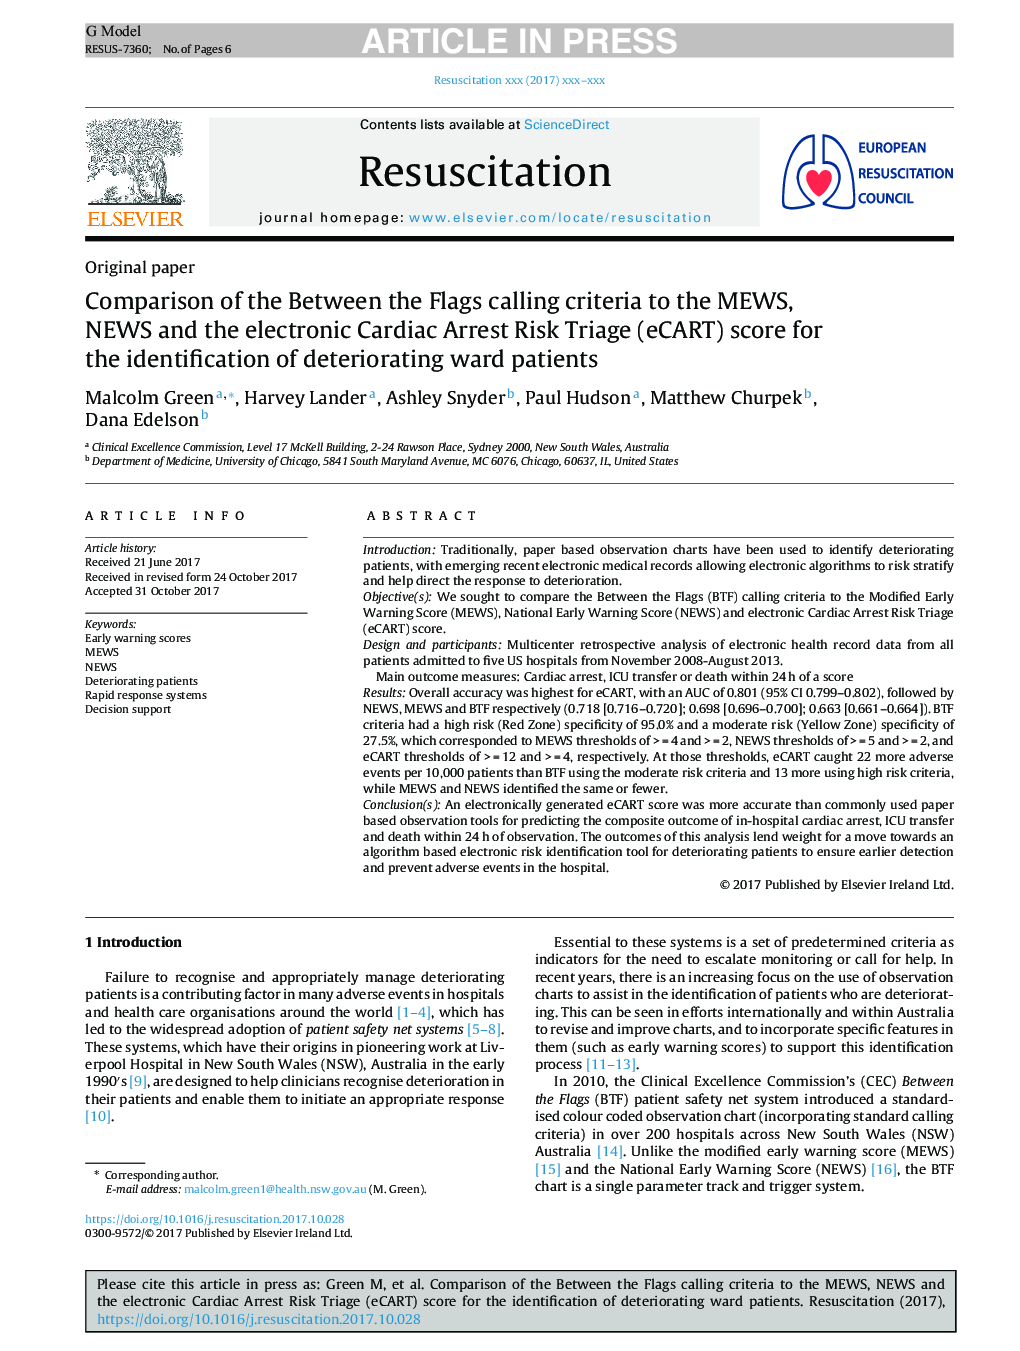 Comparison of the Between the Flags calling criteria to the MEWS, NEWS and the electronic Cardiac Arrest Risk Triage (eCART) score for the identification of deteriorating ward patients